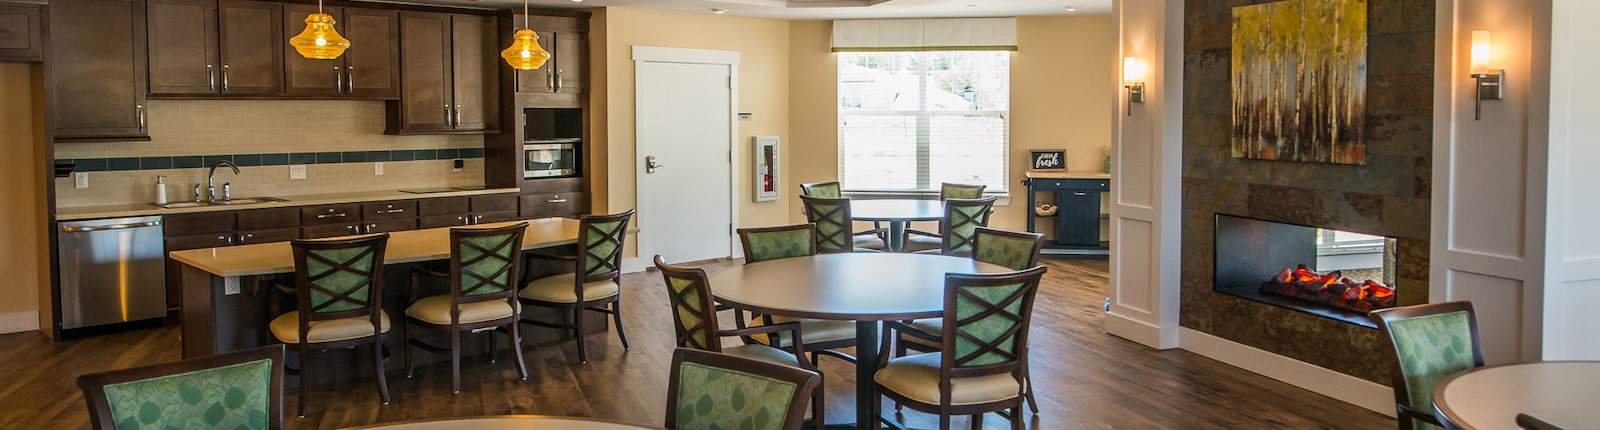 senior living common area included in assisted living prices